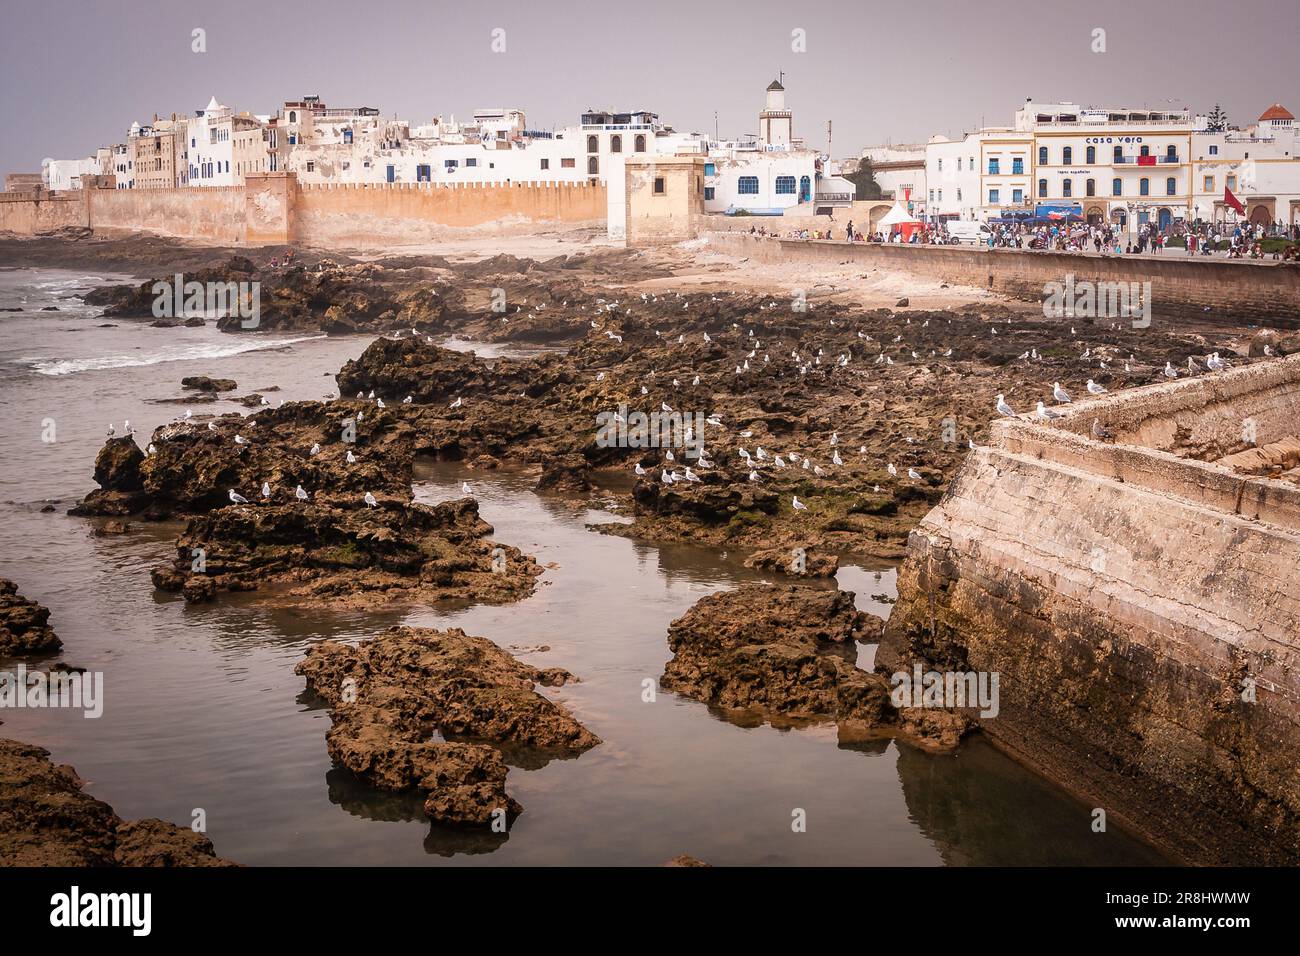 Fortification walls, with the rocks of the sea, on an evening at sunset. Essaouira, known until the 1960s as Mogador, is a port city in the western Mo Stock Photo